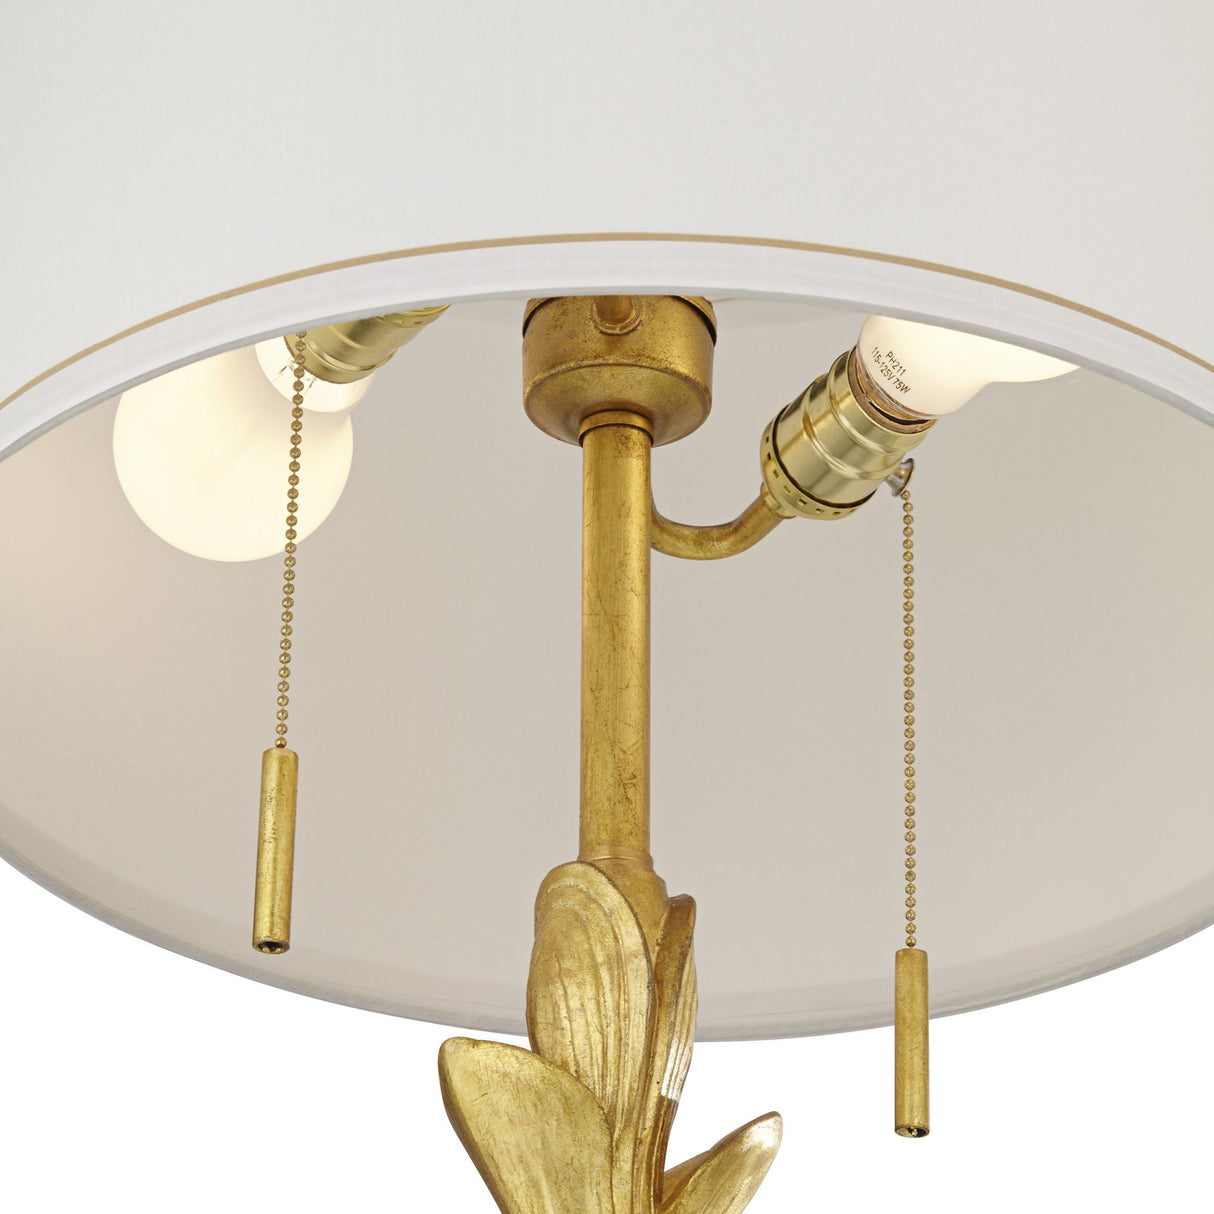 Goldcliff - Table Lamp - Gold